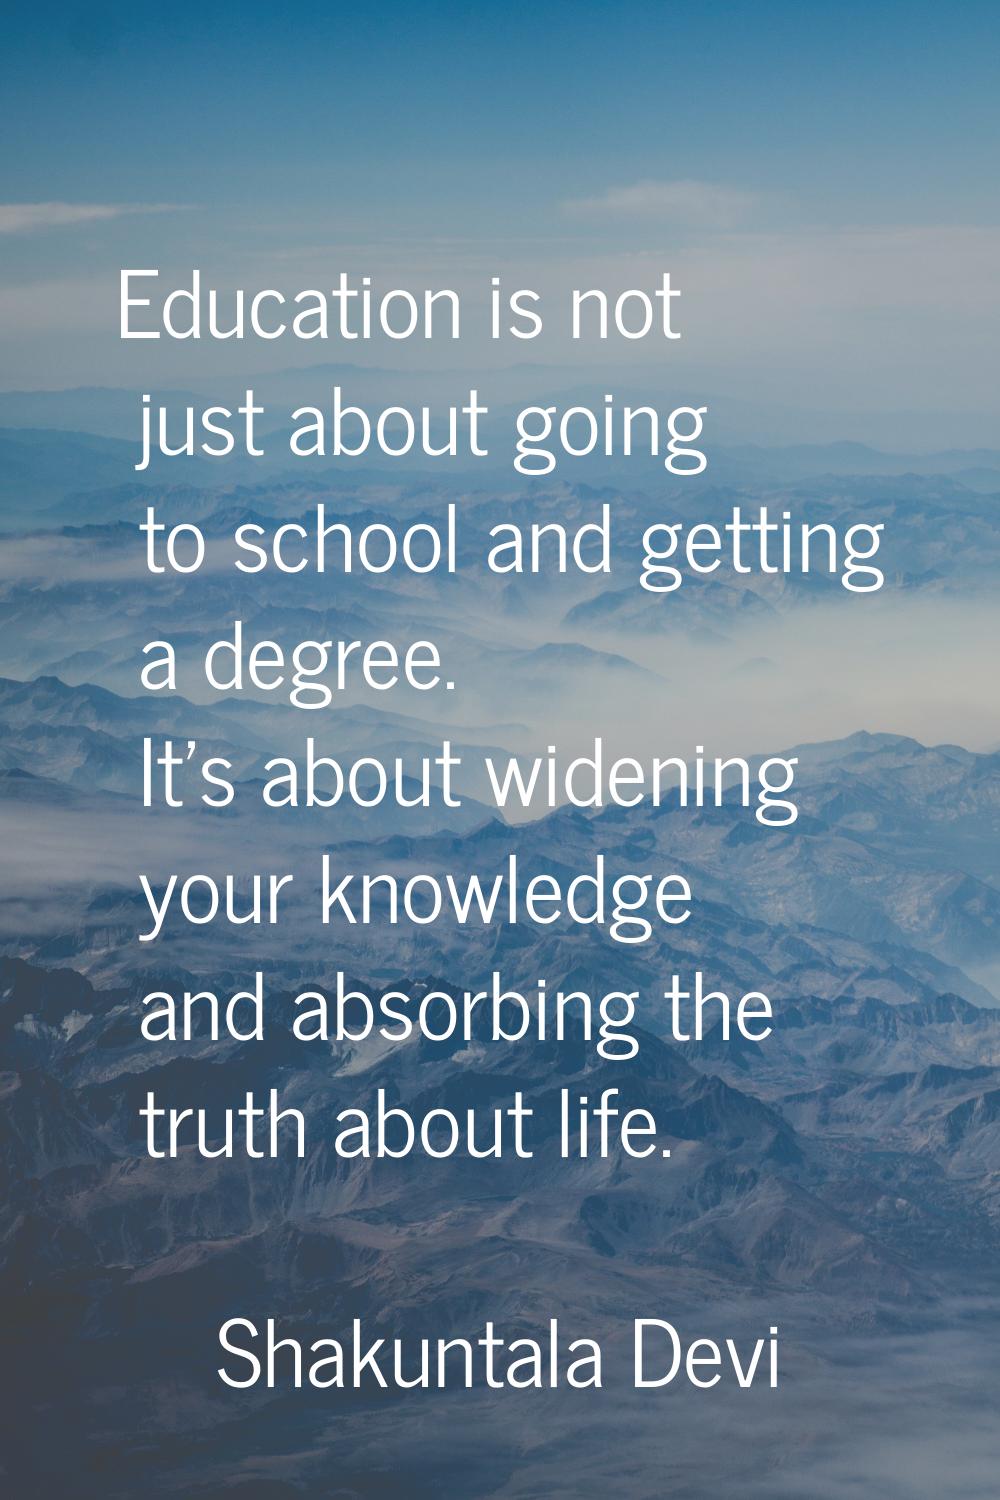 Education is not just about going to school and getting a degree. It's about widening your knowledg